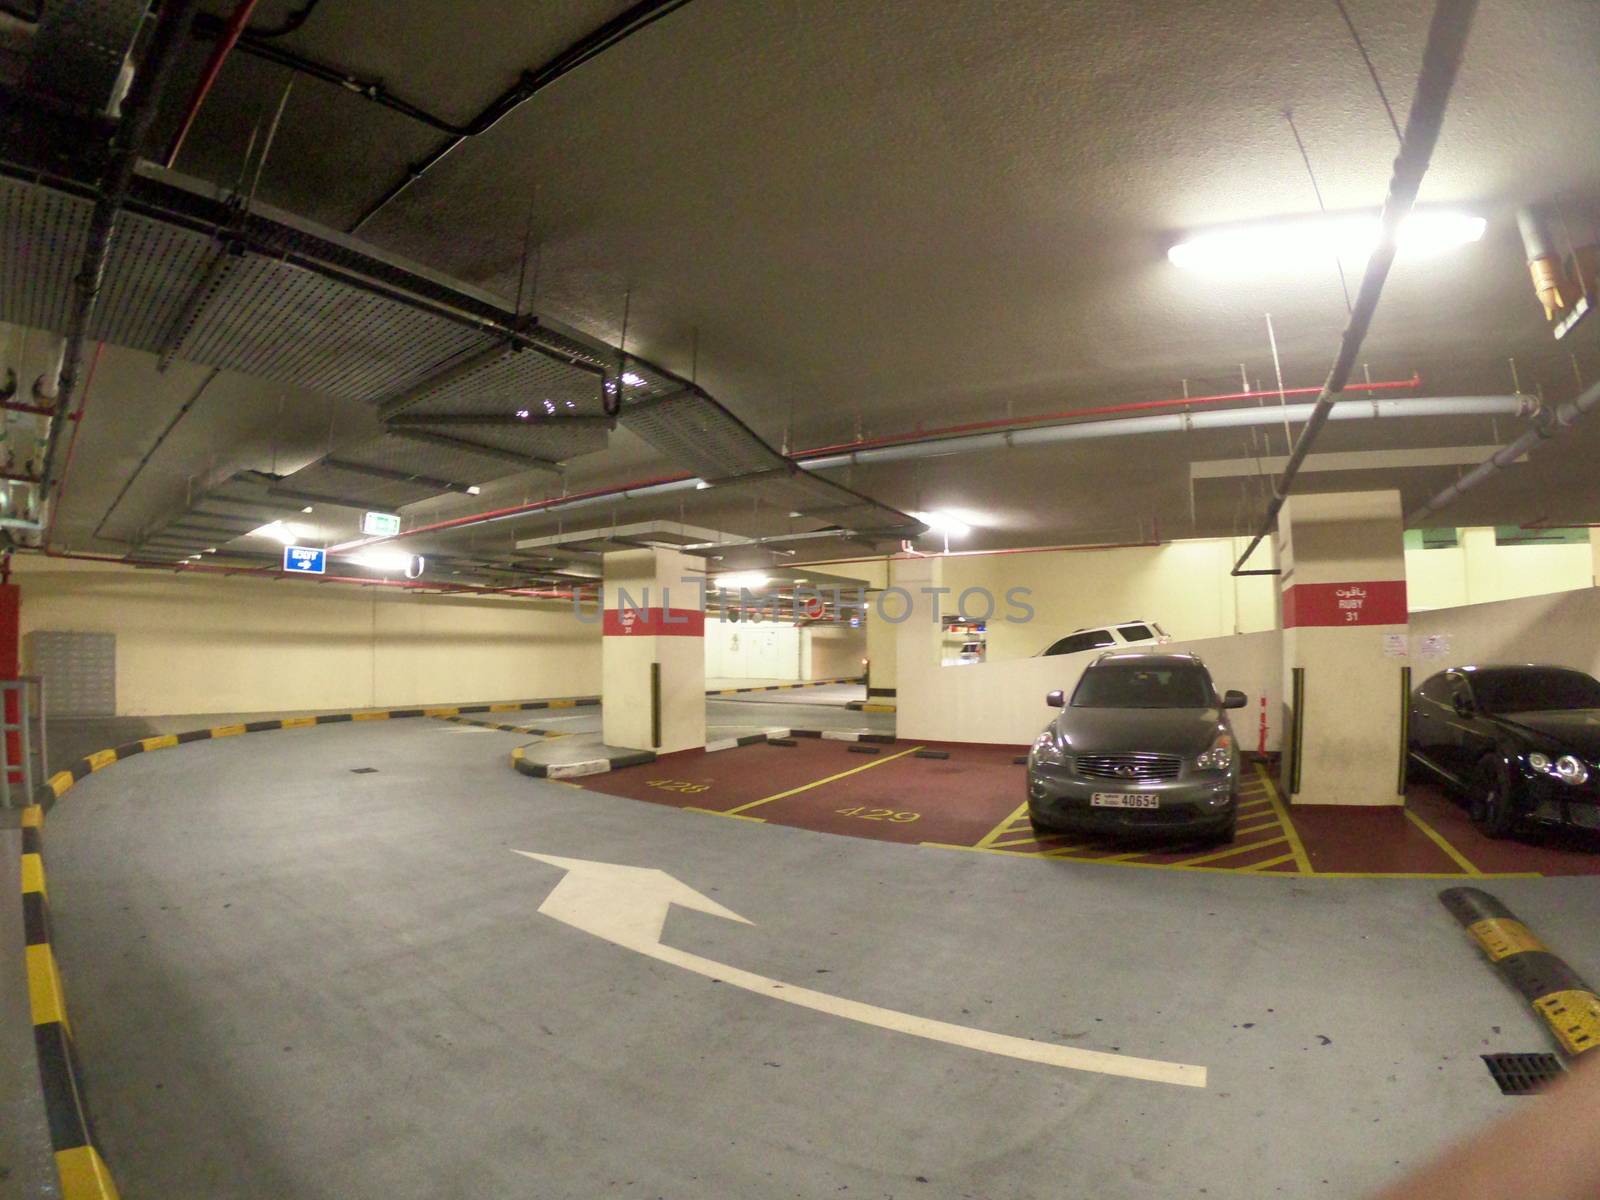 Numbered Parking Lot in Dubai Basement with two cars.